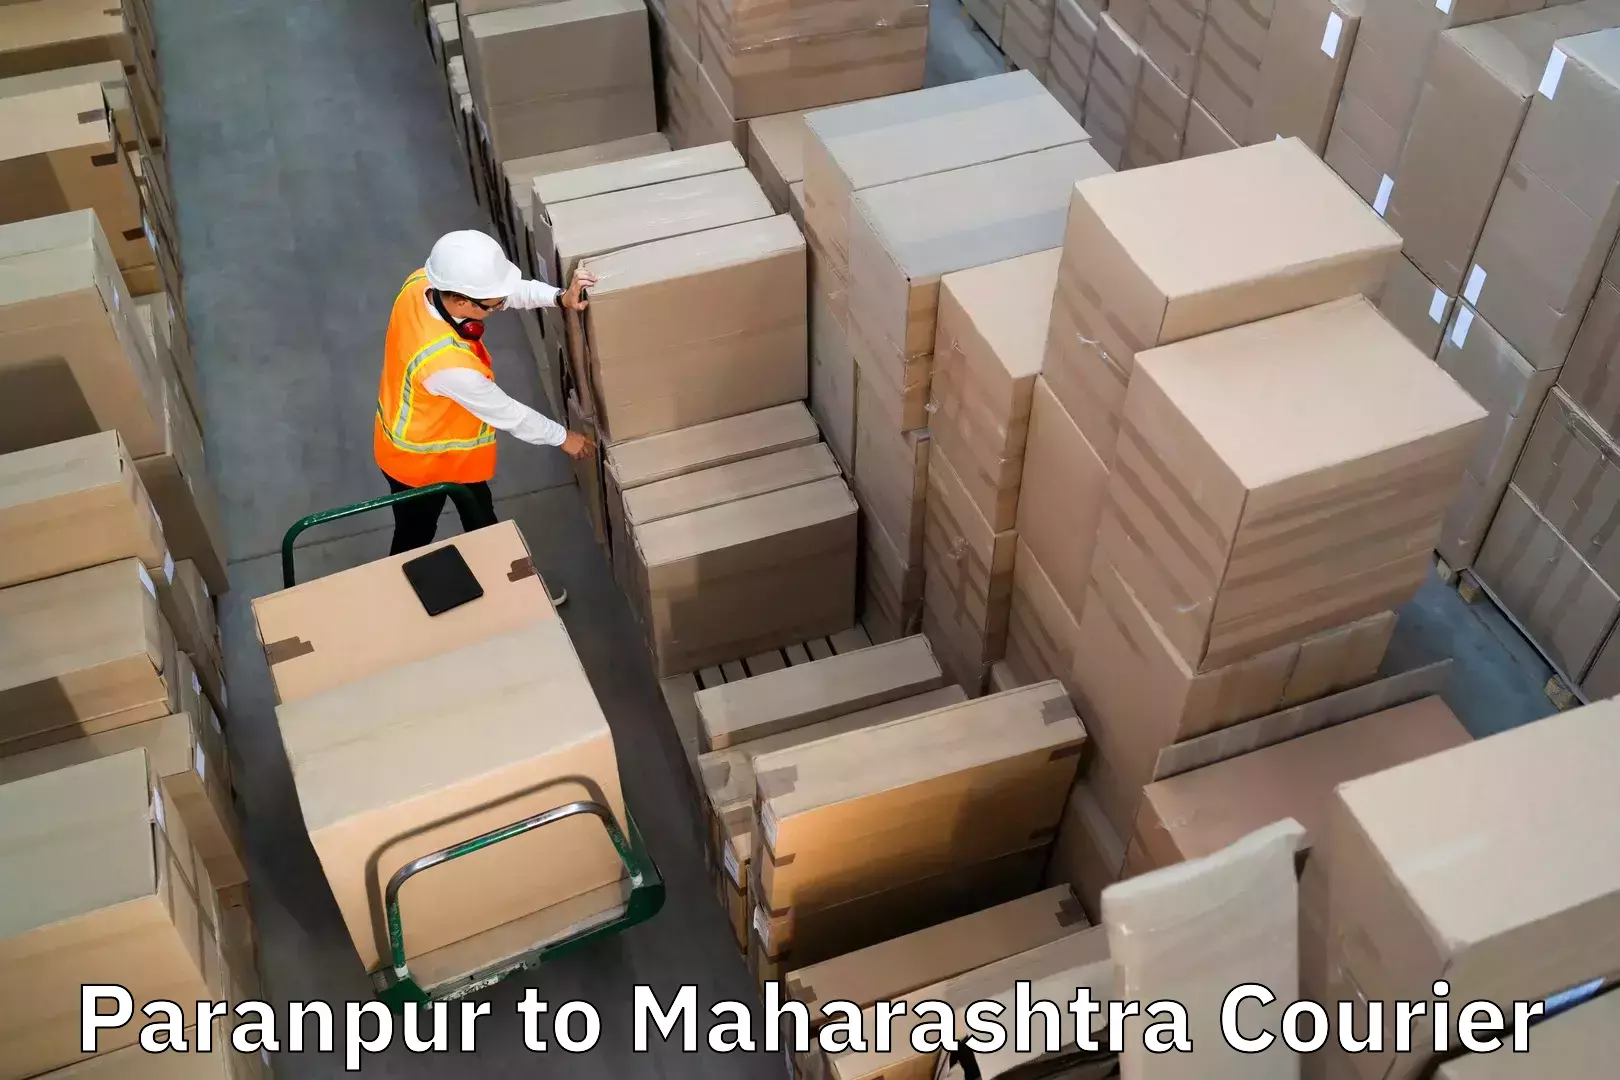 Luggage shipment specialists Paranpur to Mahim